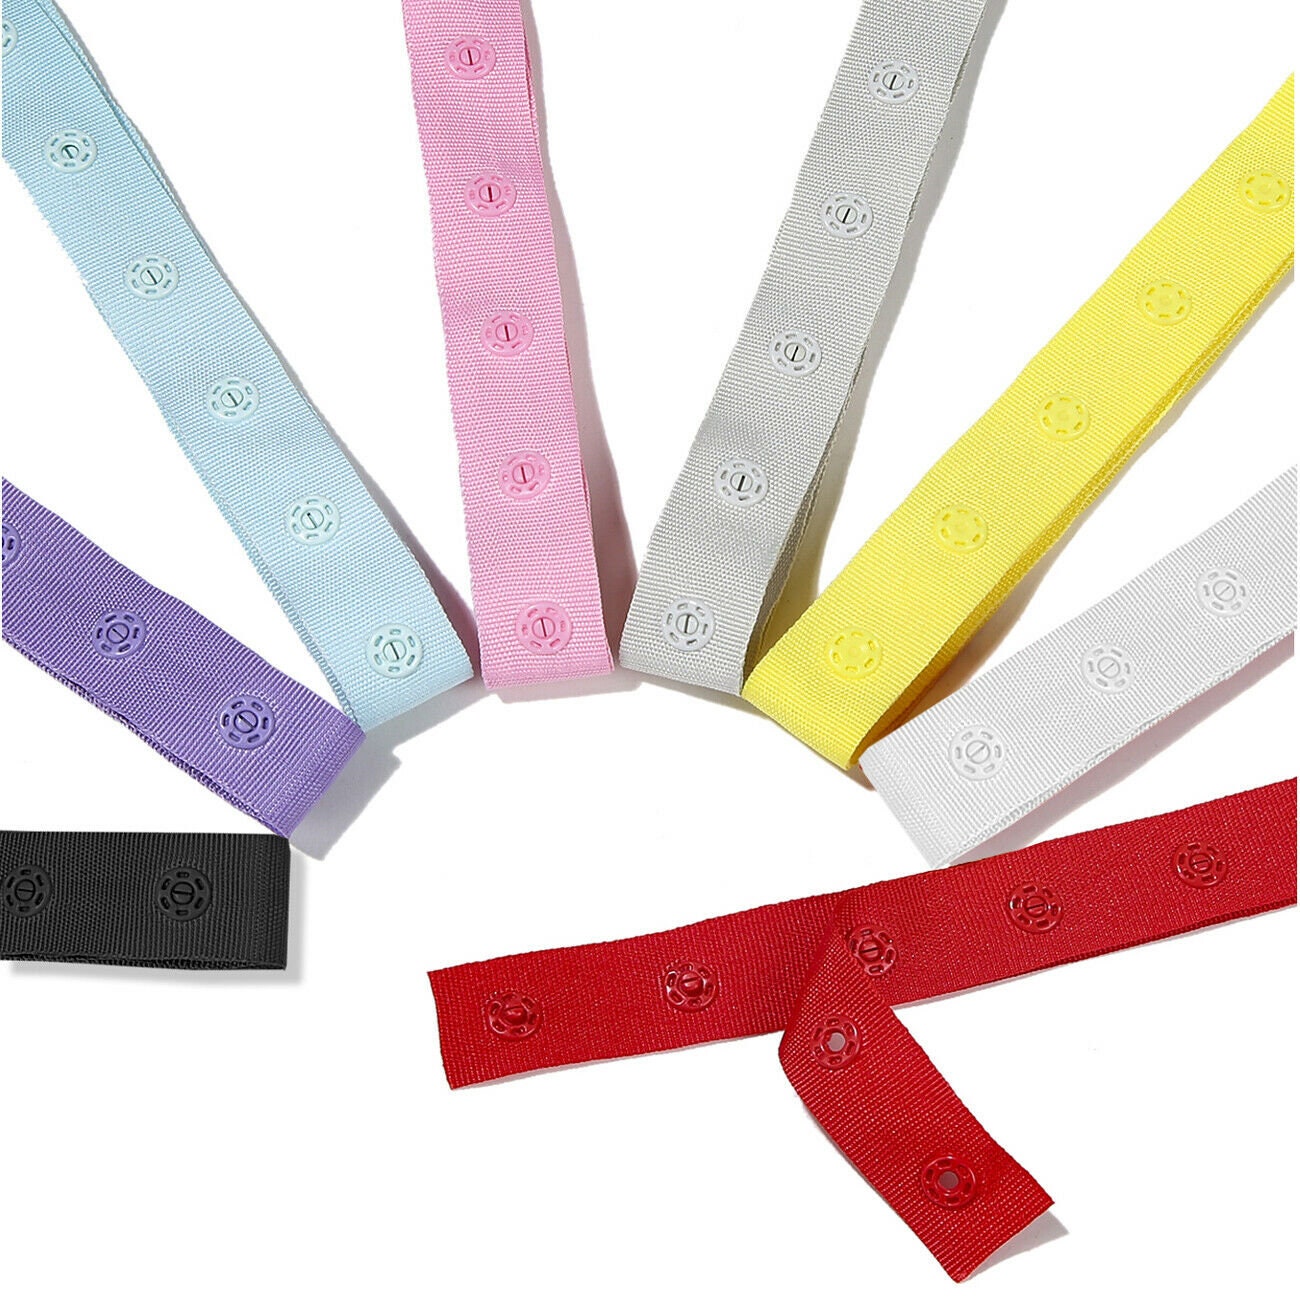 Snap tape with plastic snaps, 3 snaps on 60 mm (2 3/8 in) strip